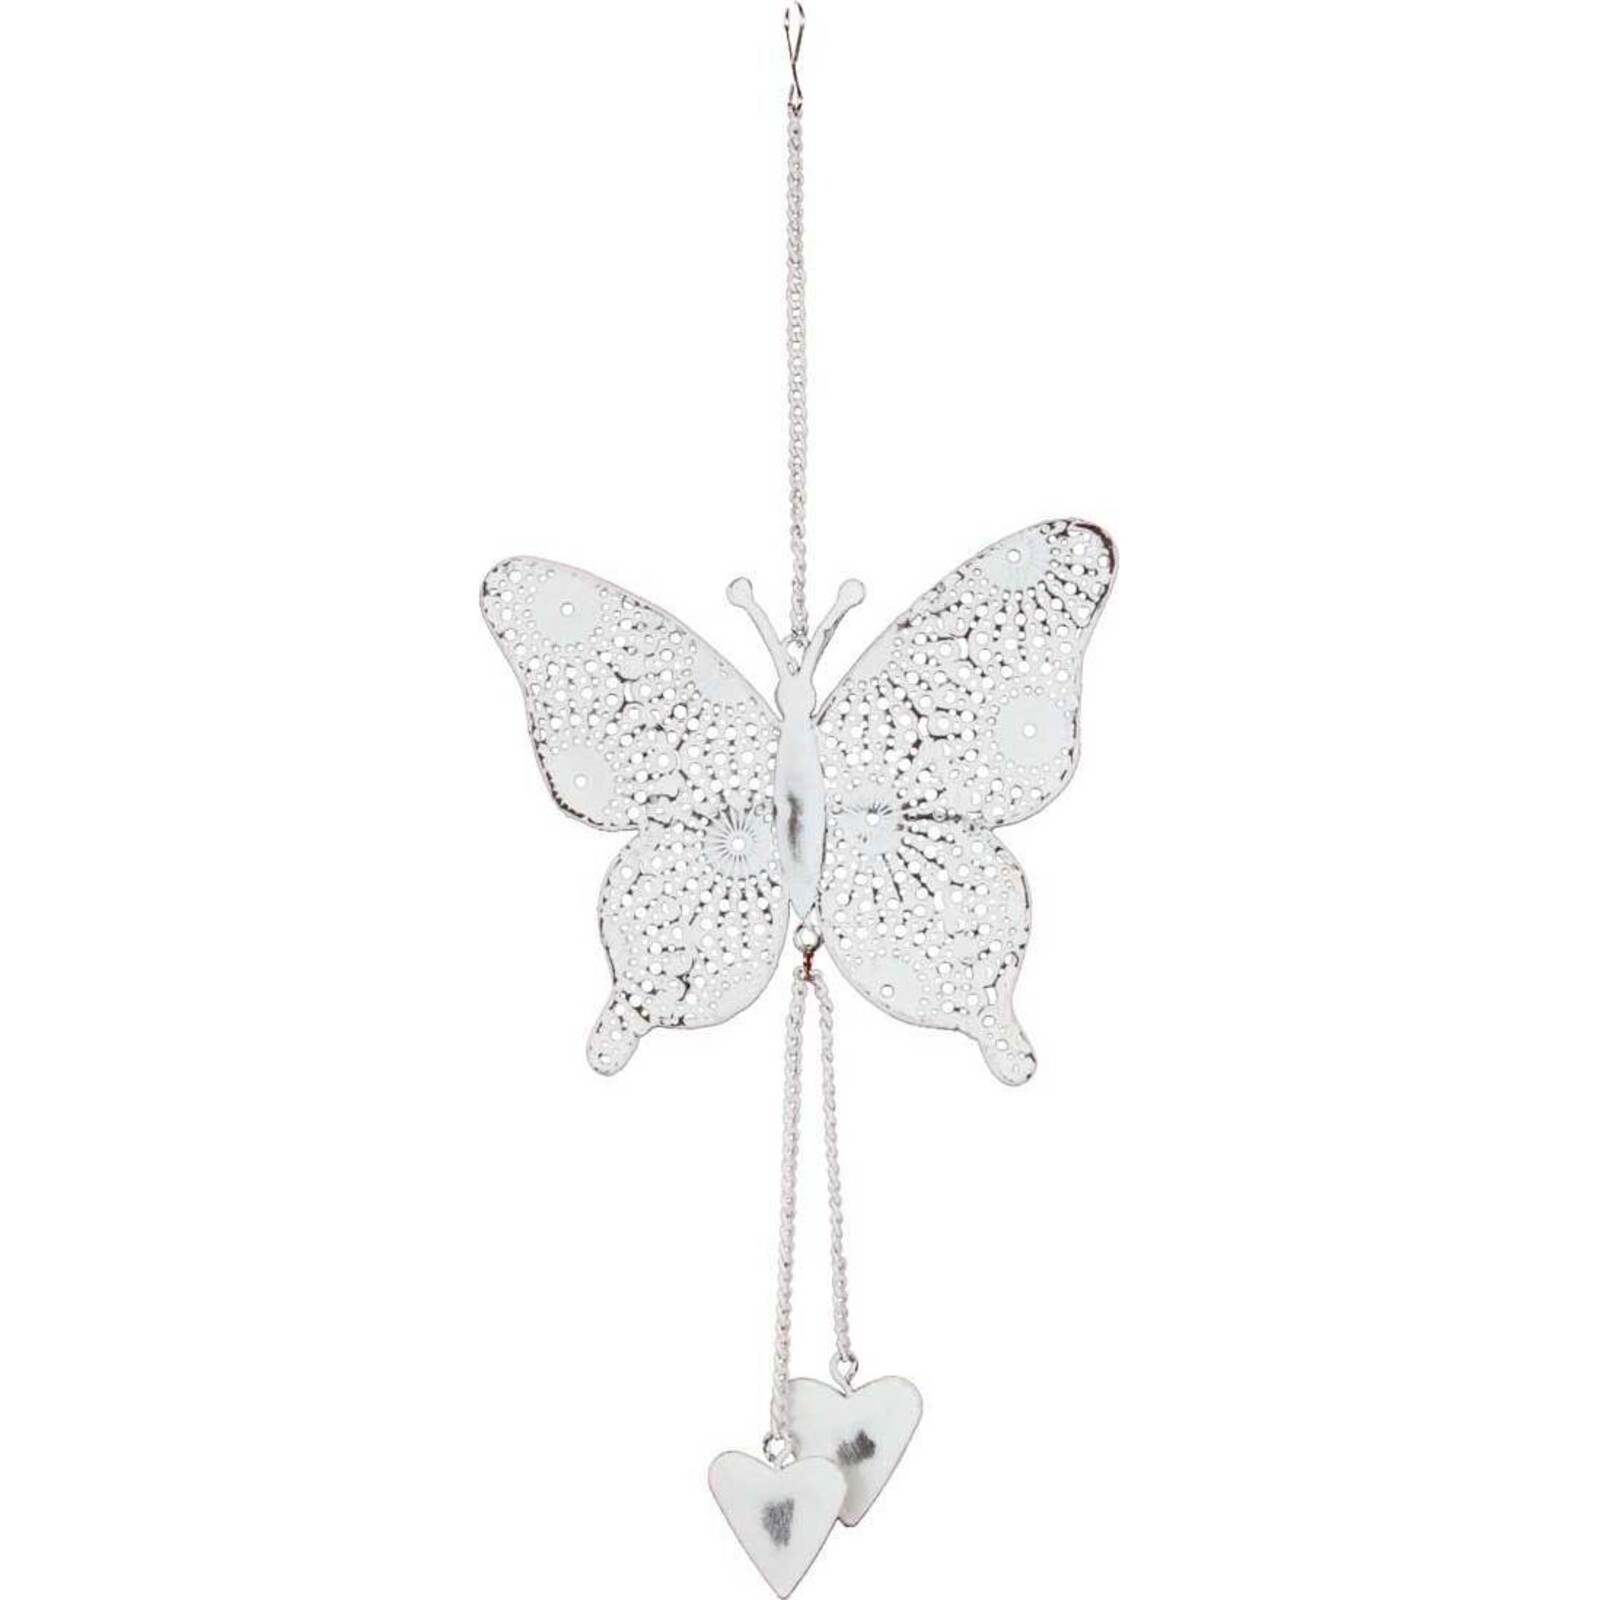 Hanging Butterfly Filigree